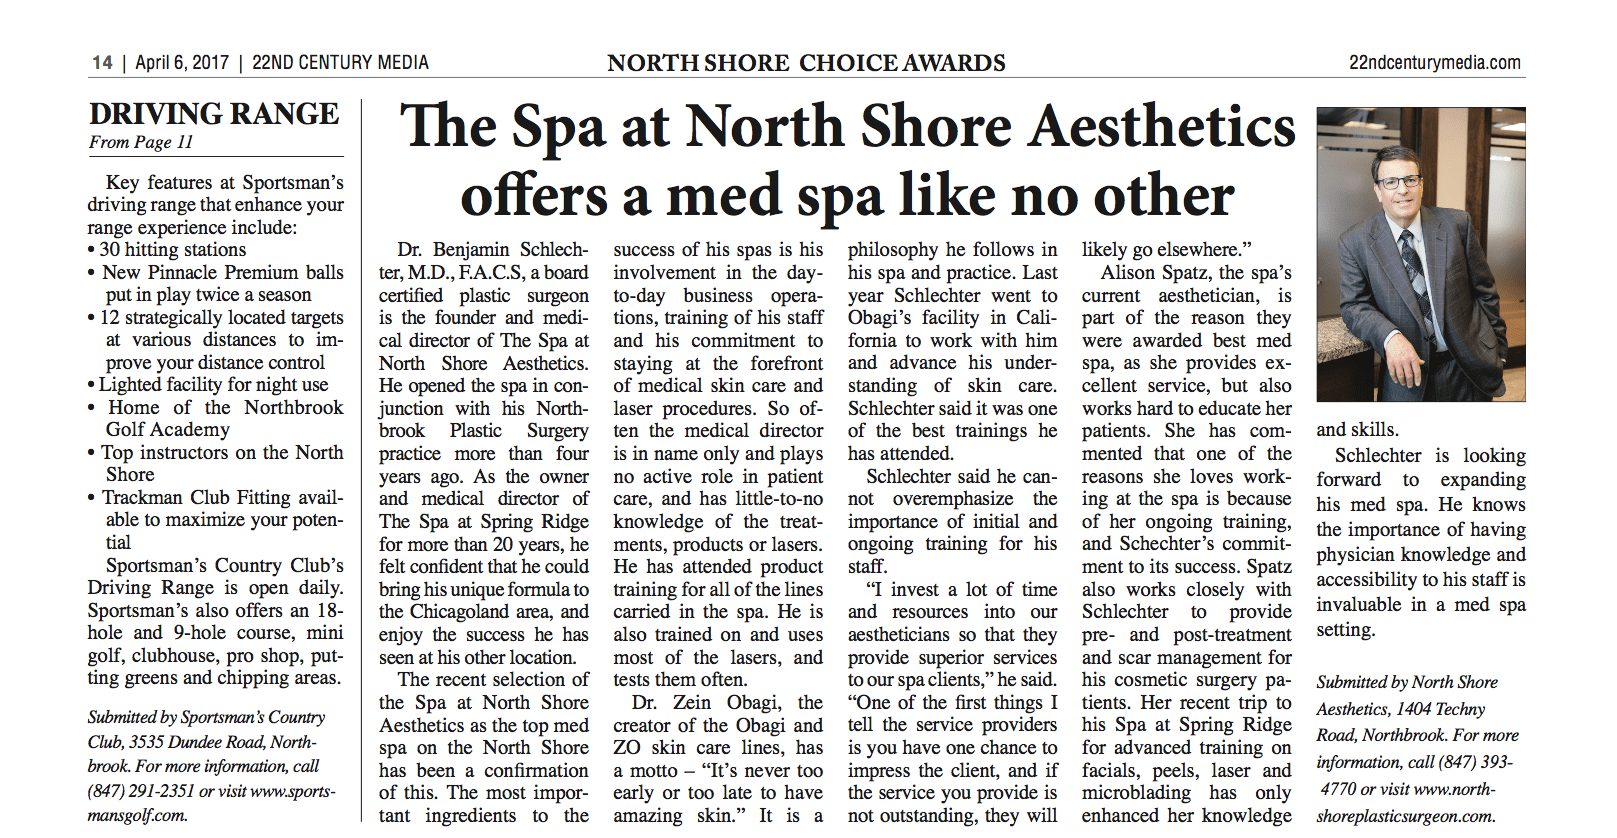 The Spa at North Shore Aesthetics Offers a Med Spa Like No Other